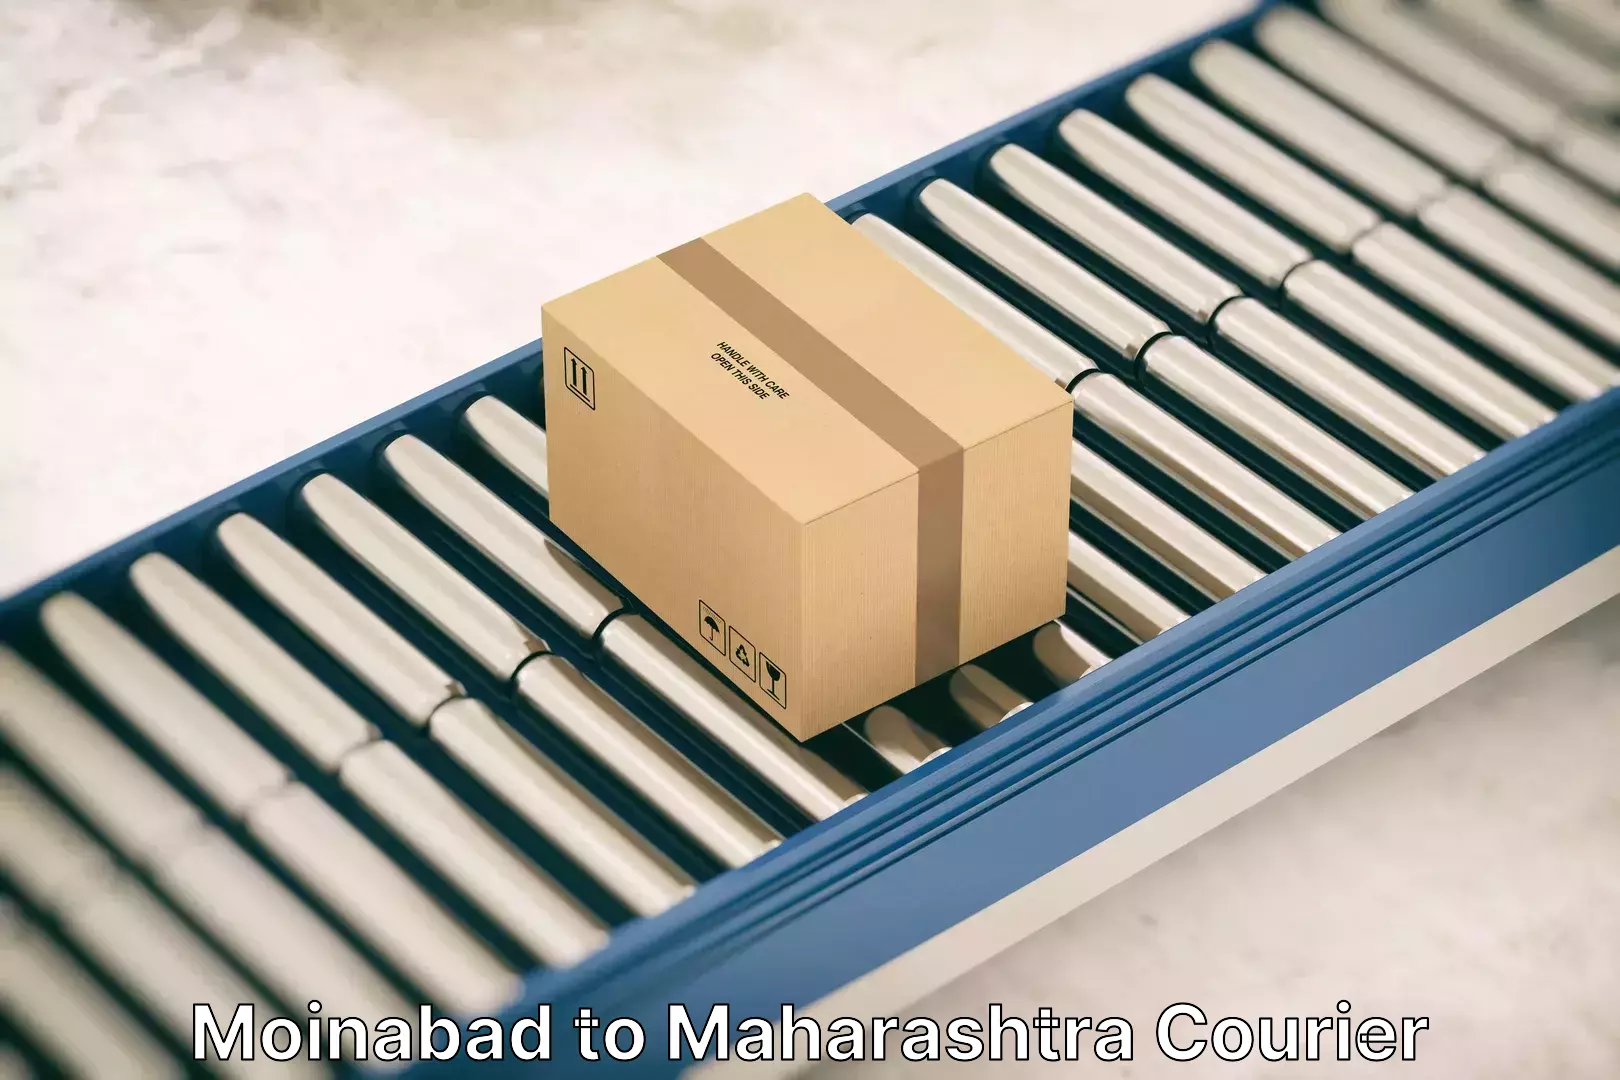 Door-to-door relocation services Moinabad to Maharashtra